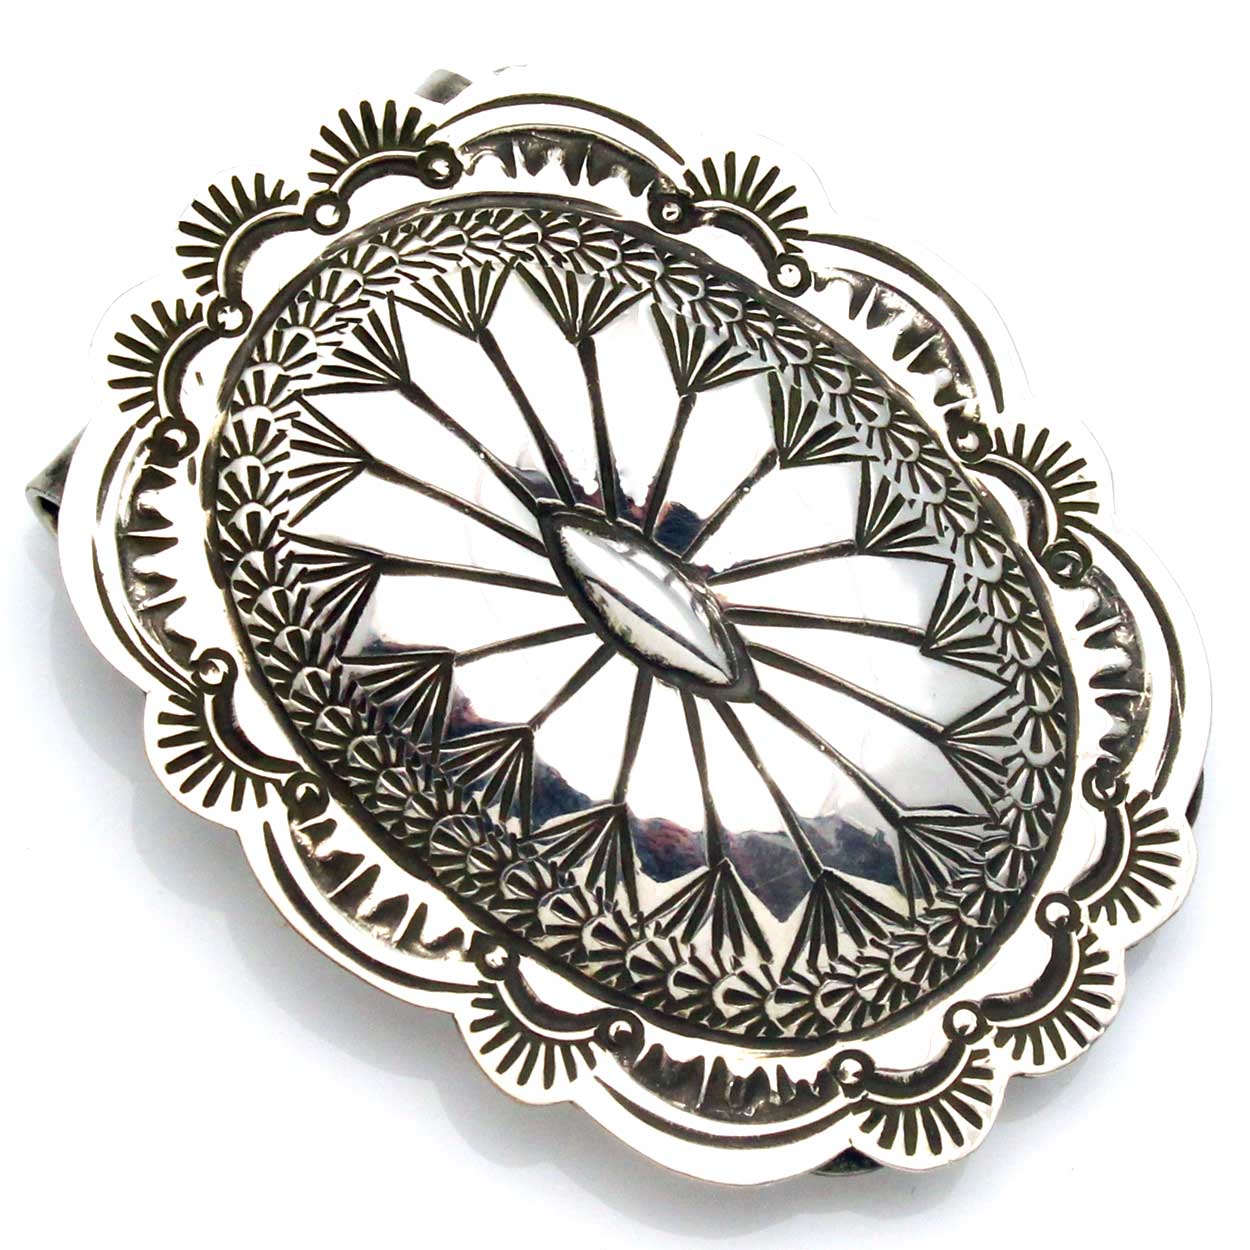 Oval Stamped Silver Money Clip By A. Blackgoat